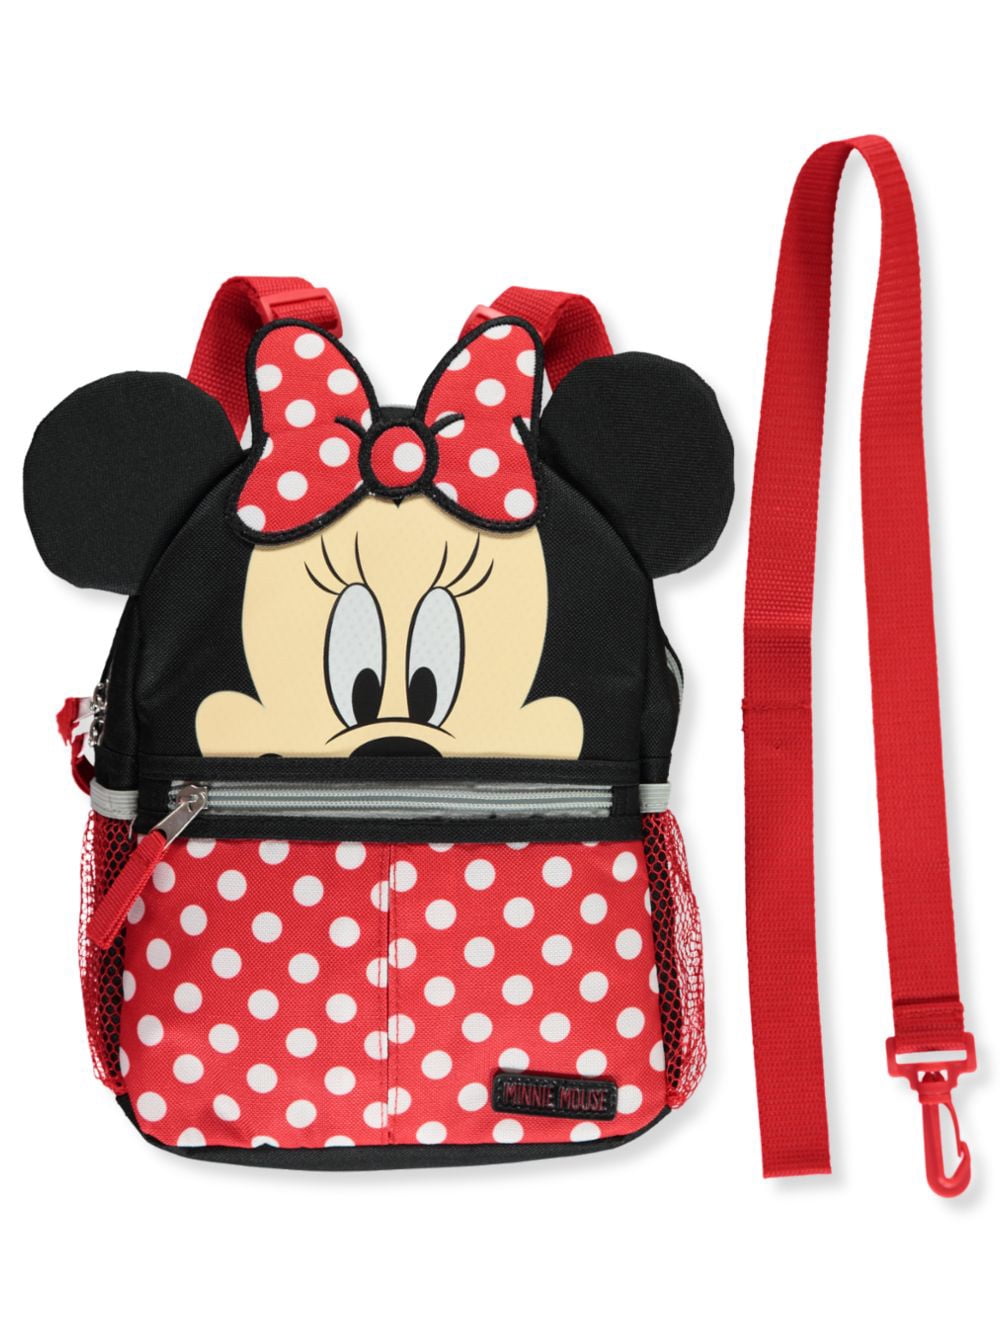 Disney Mickey Mouse Mini Backpack with Safety Harness Straps for Toddlers 